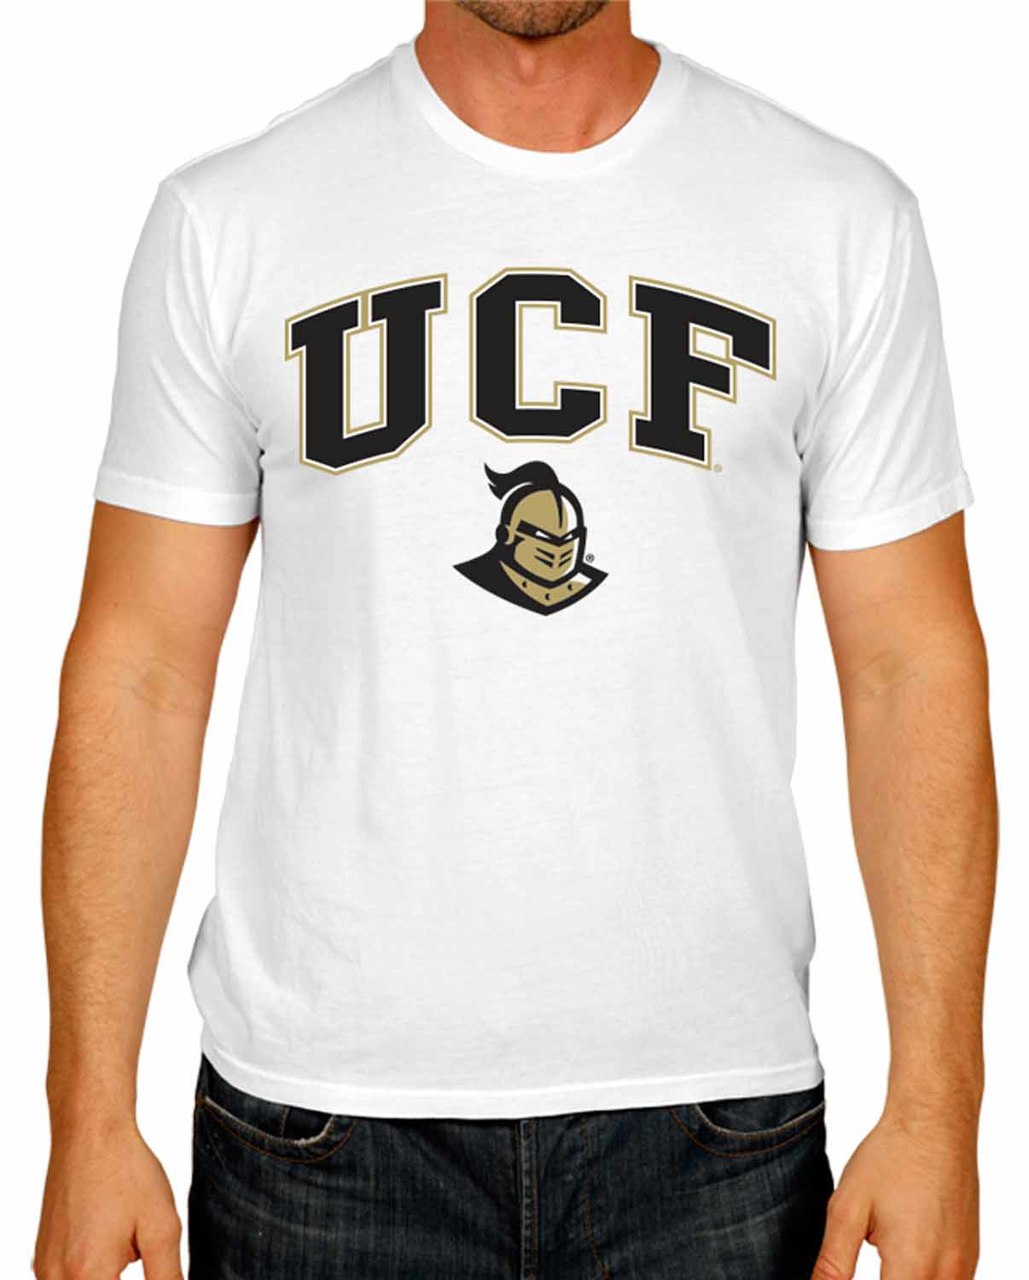 Central Florida Knights NCAA Adult Gameday Cotton T-Shirt - White